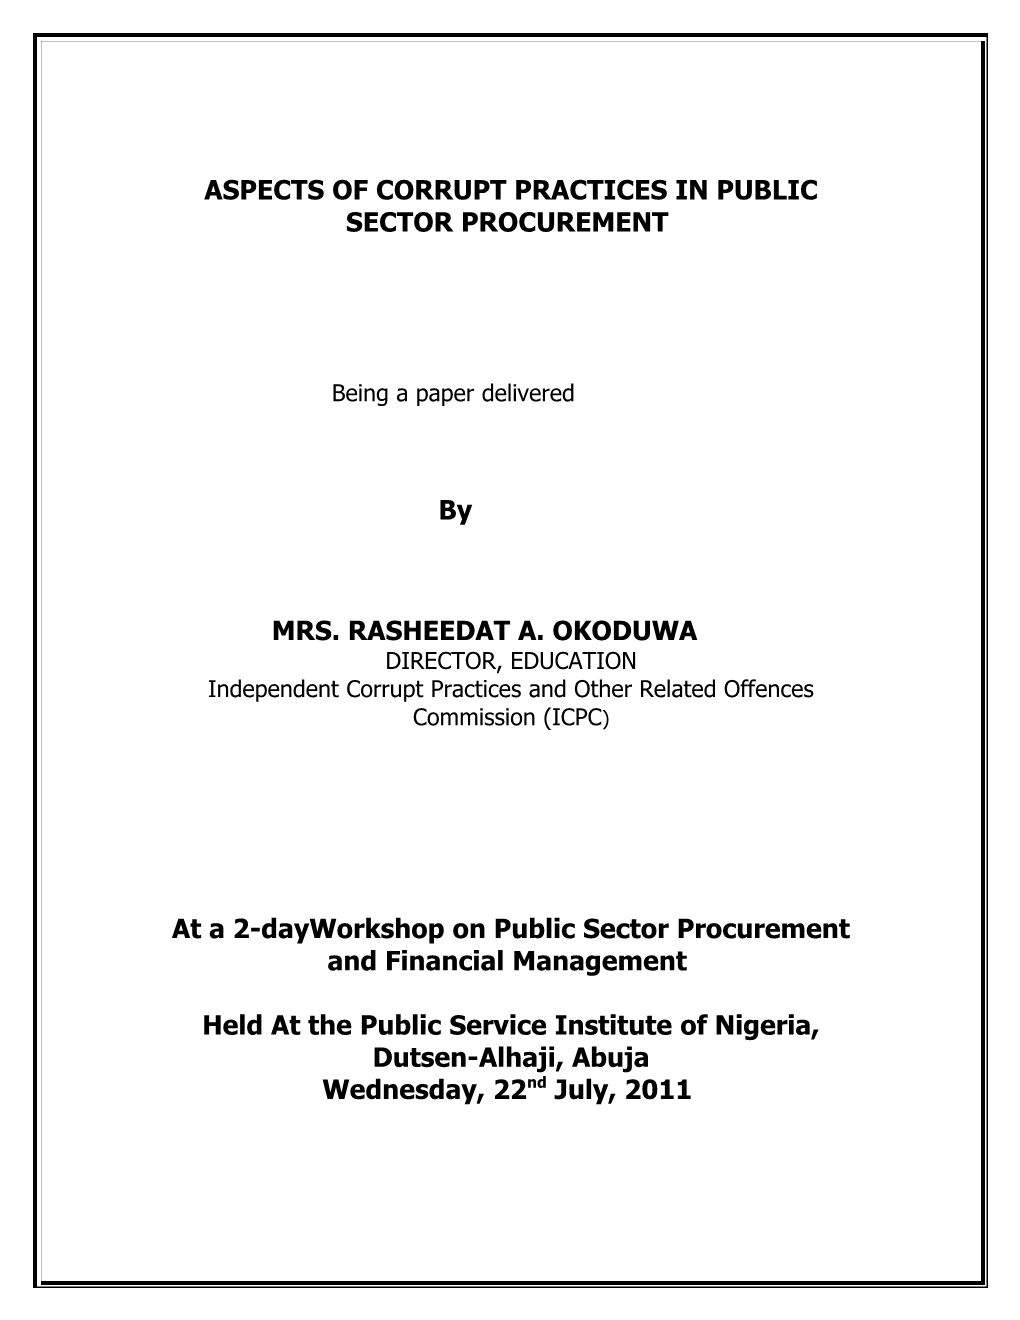 Aspects of Corrupt Practices in Public Sector Procurement